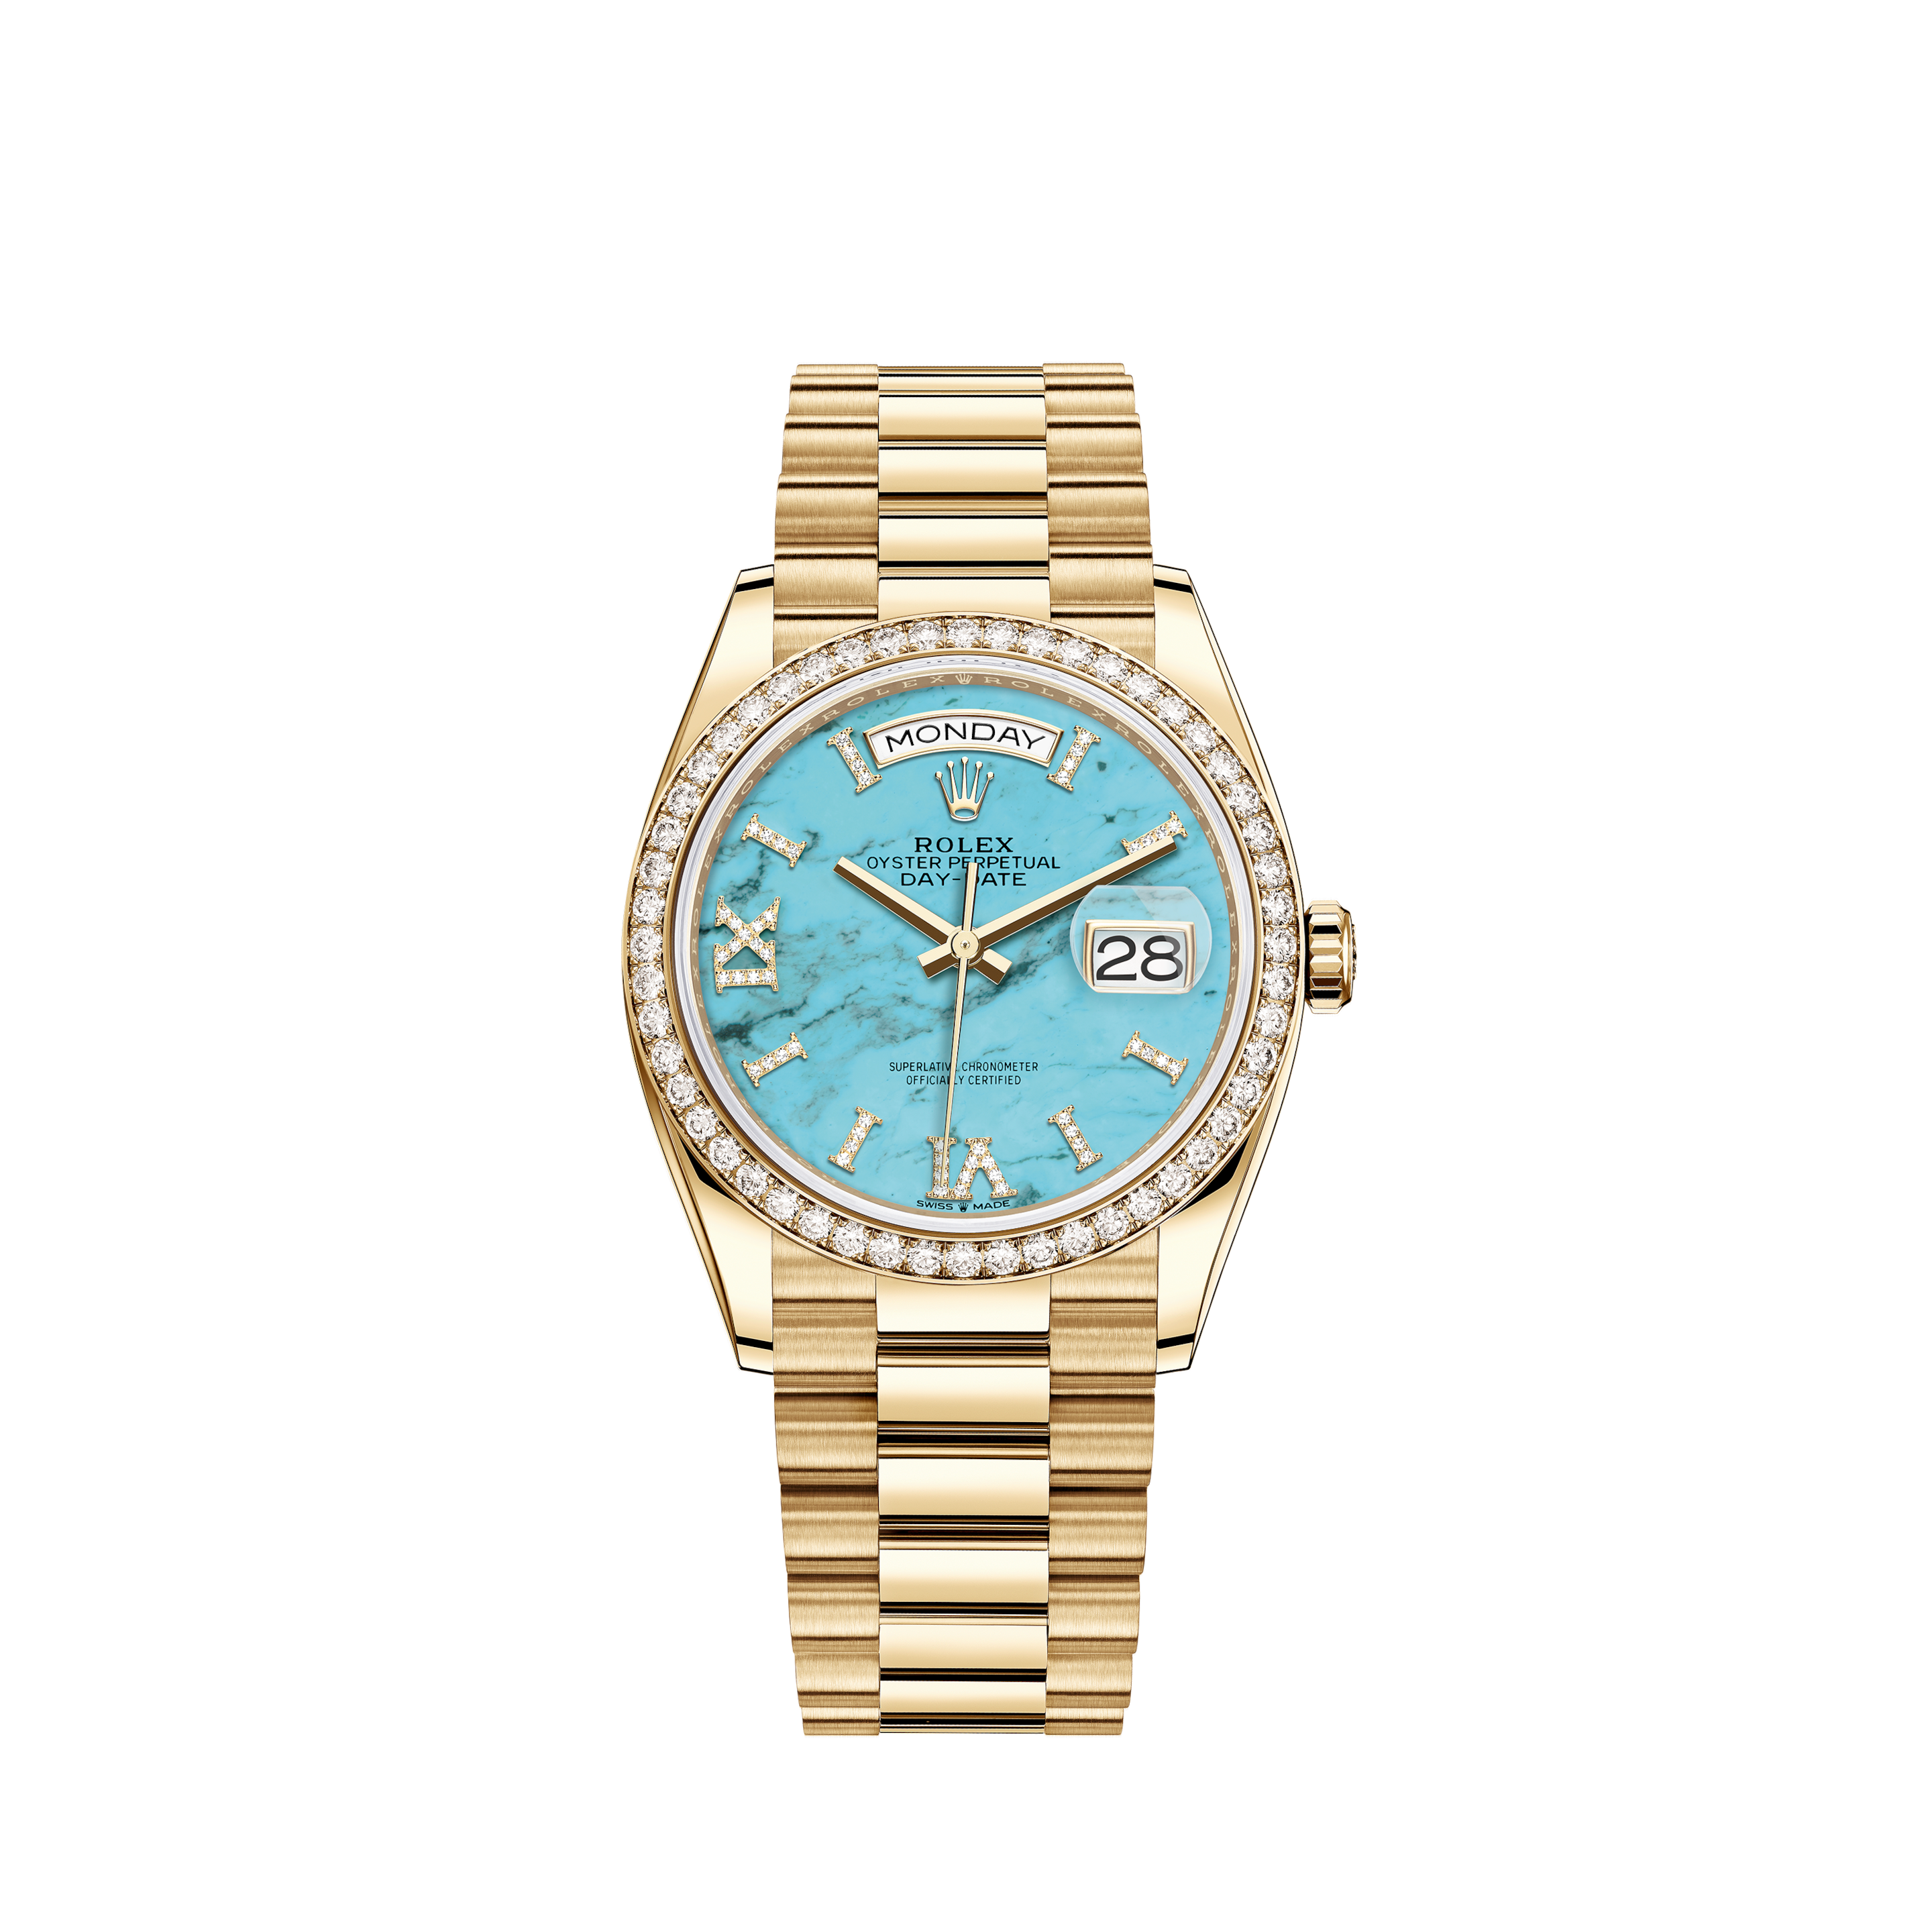 Rolex President Datejust 26mm 1.35ct Diamond Bezel/Baby Pink Dial Gold WatchRolex Oyster Perpetual Datejust Rhodium Dial Automatic Men's Watch - 126300